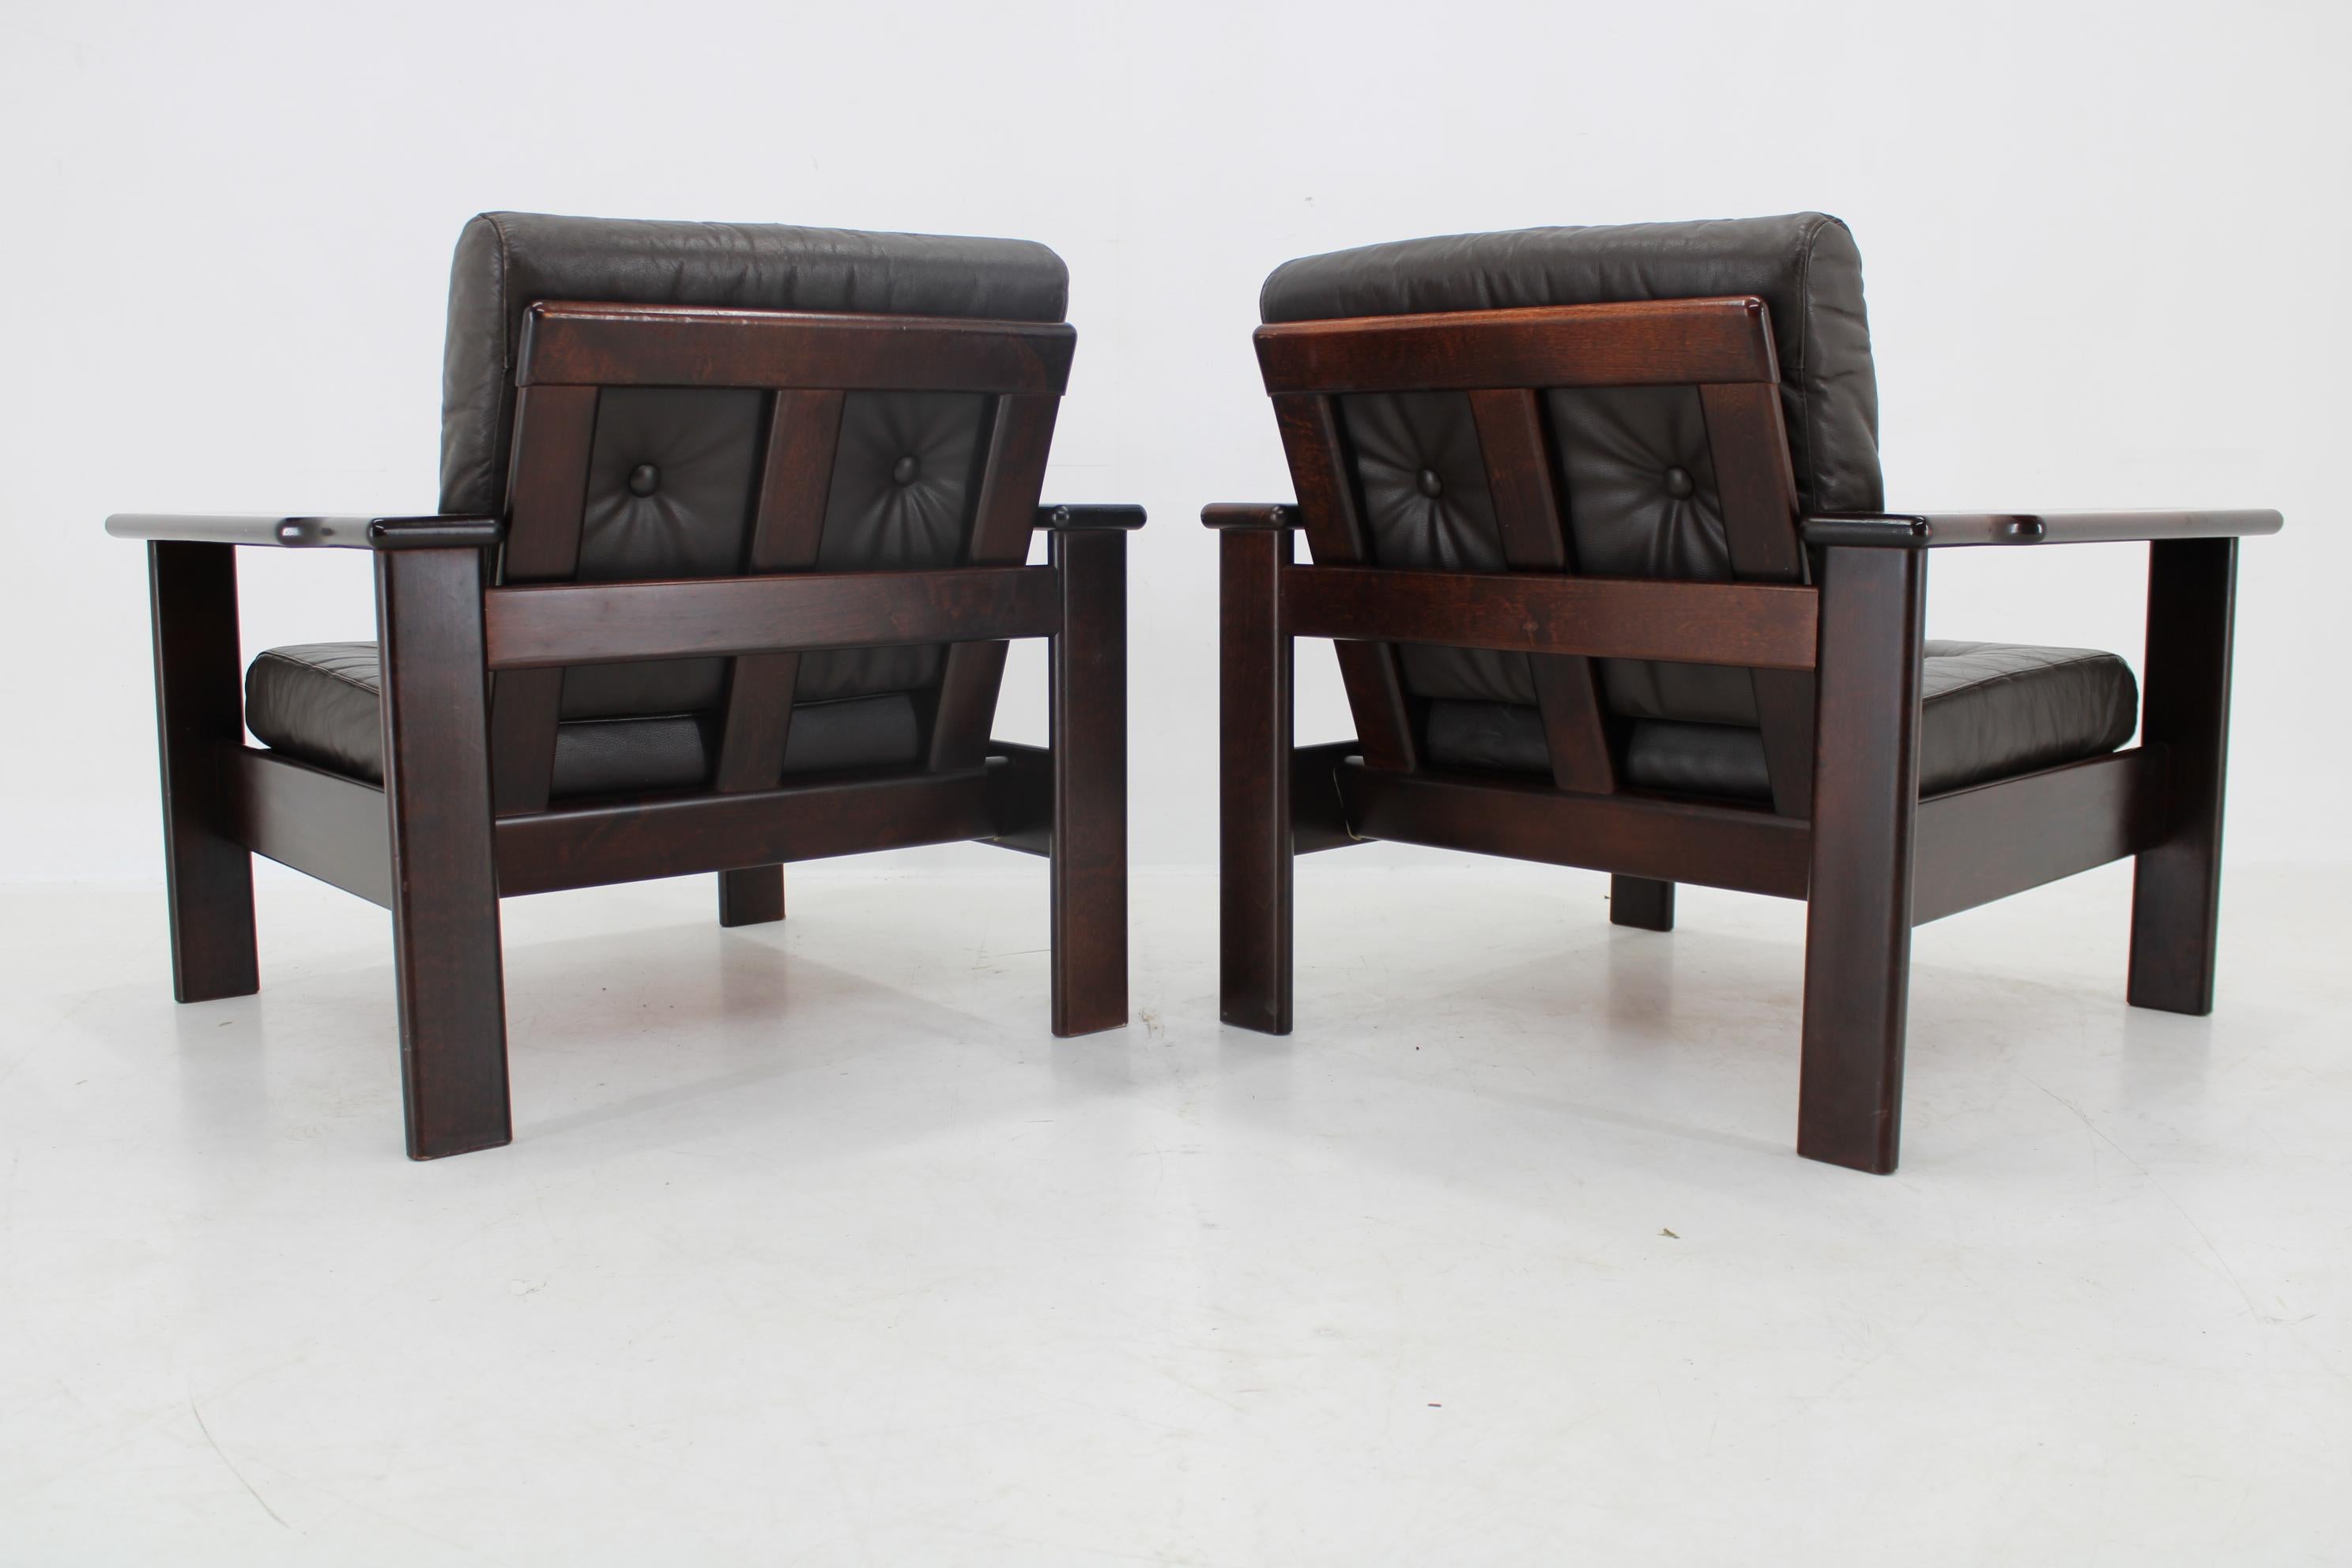 1970s Pair of Leather Armchairs by Lepofinn, Finland For Sale 9